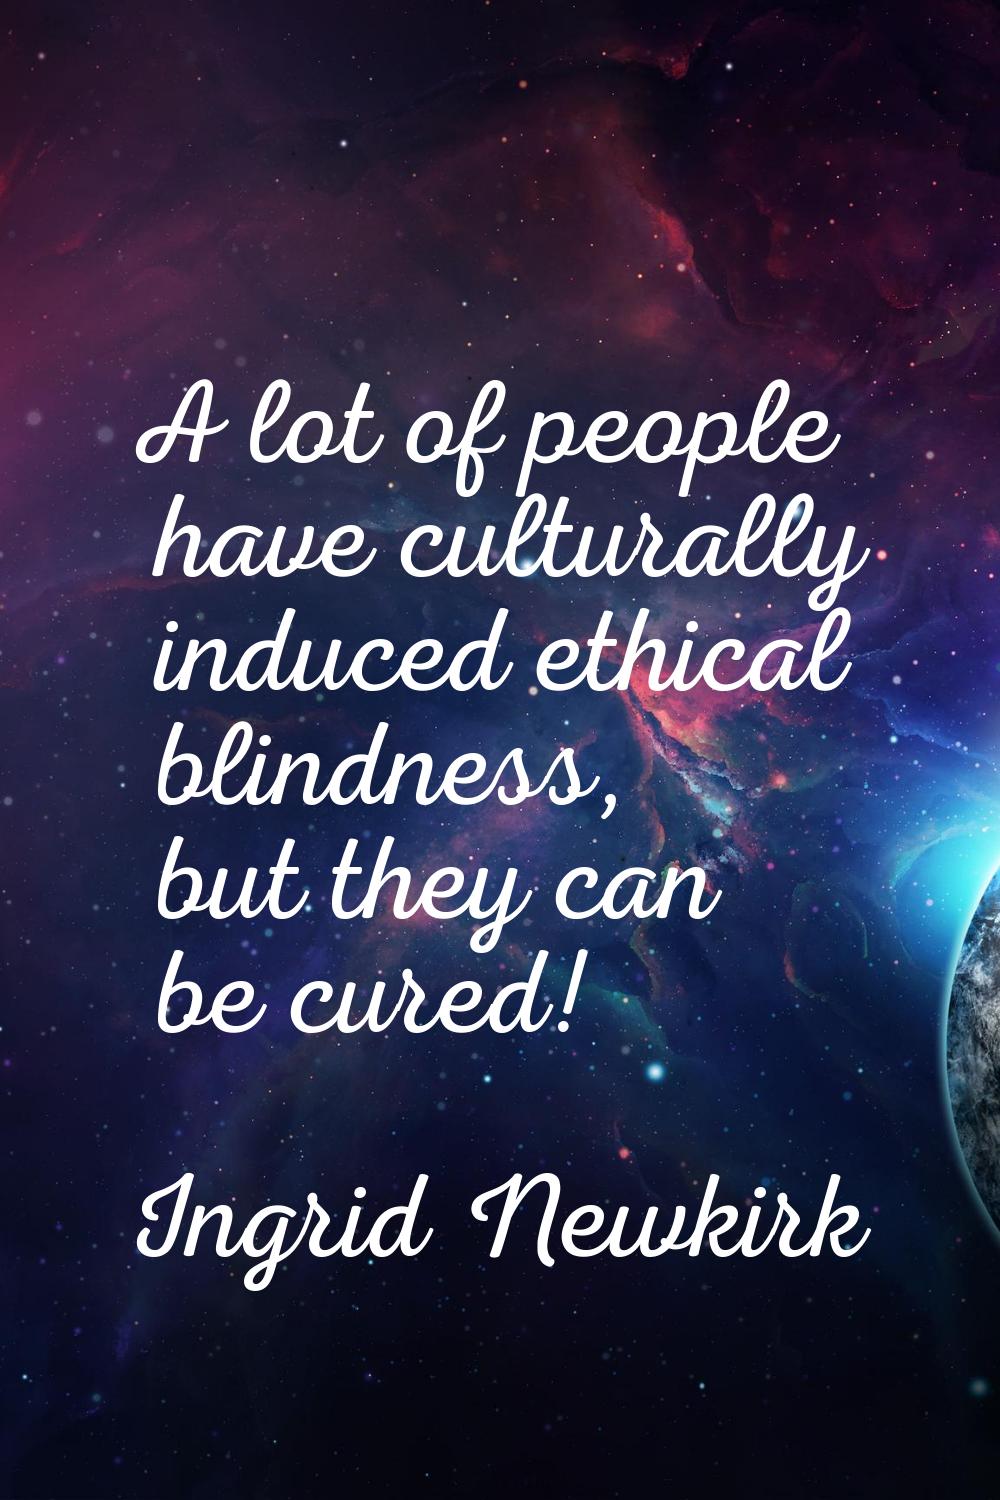 A lot of people have culturally induced ethical blindness, but they can be cured!